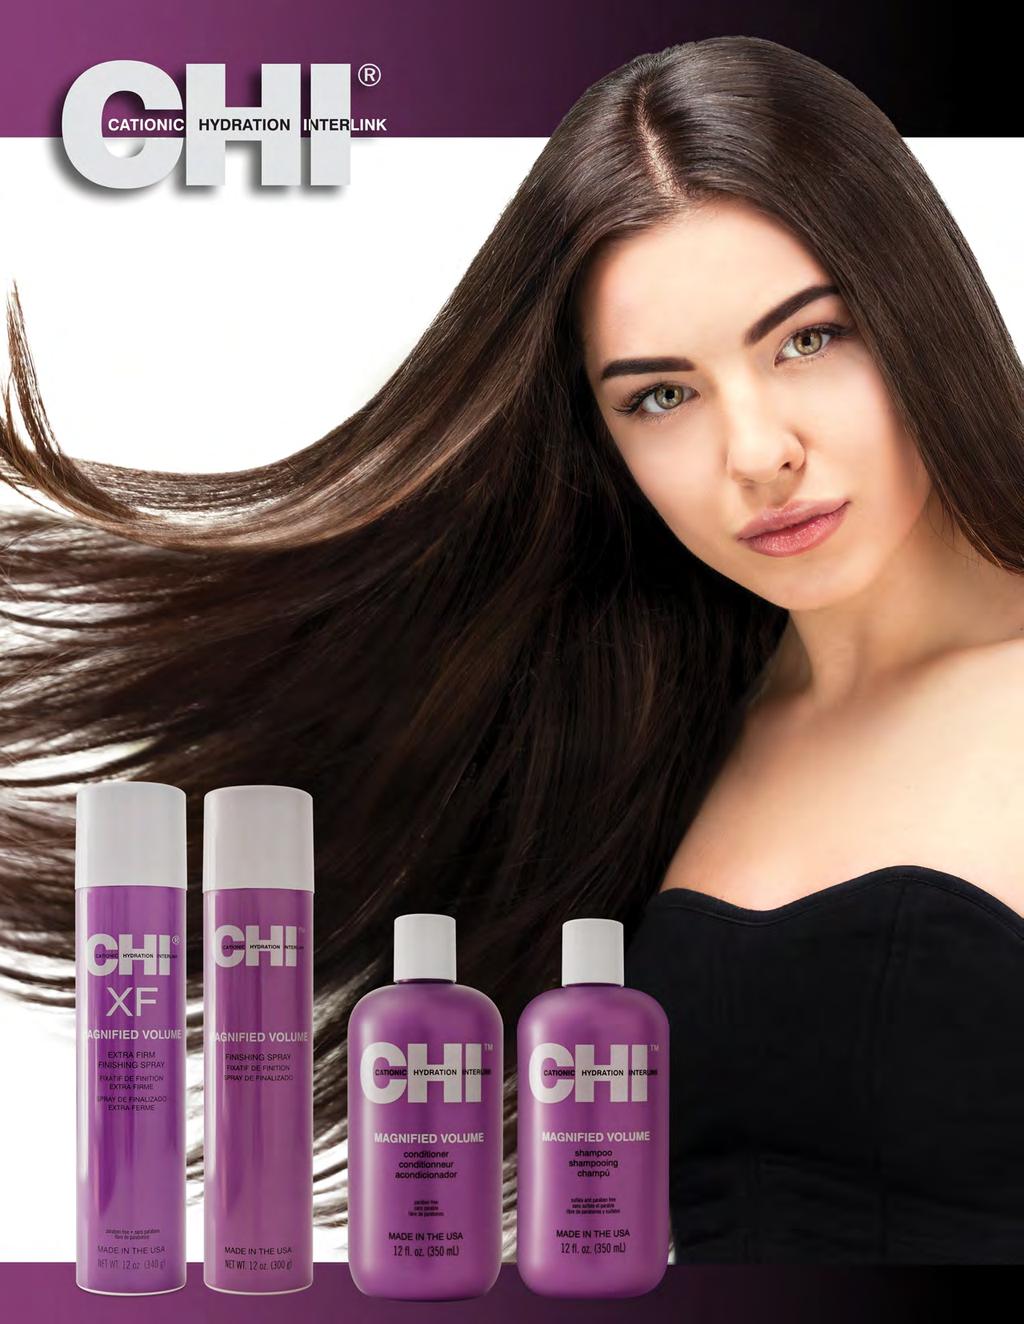 MAGNIFIED VOLUME Technology: Developed specifically for fine hair to boost volume and body with long lasting style retention.